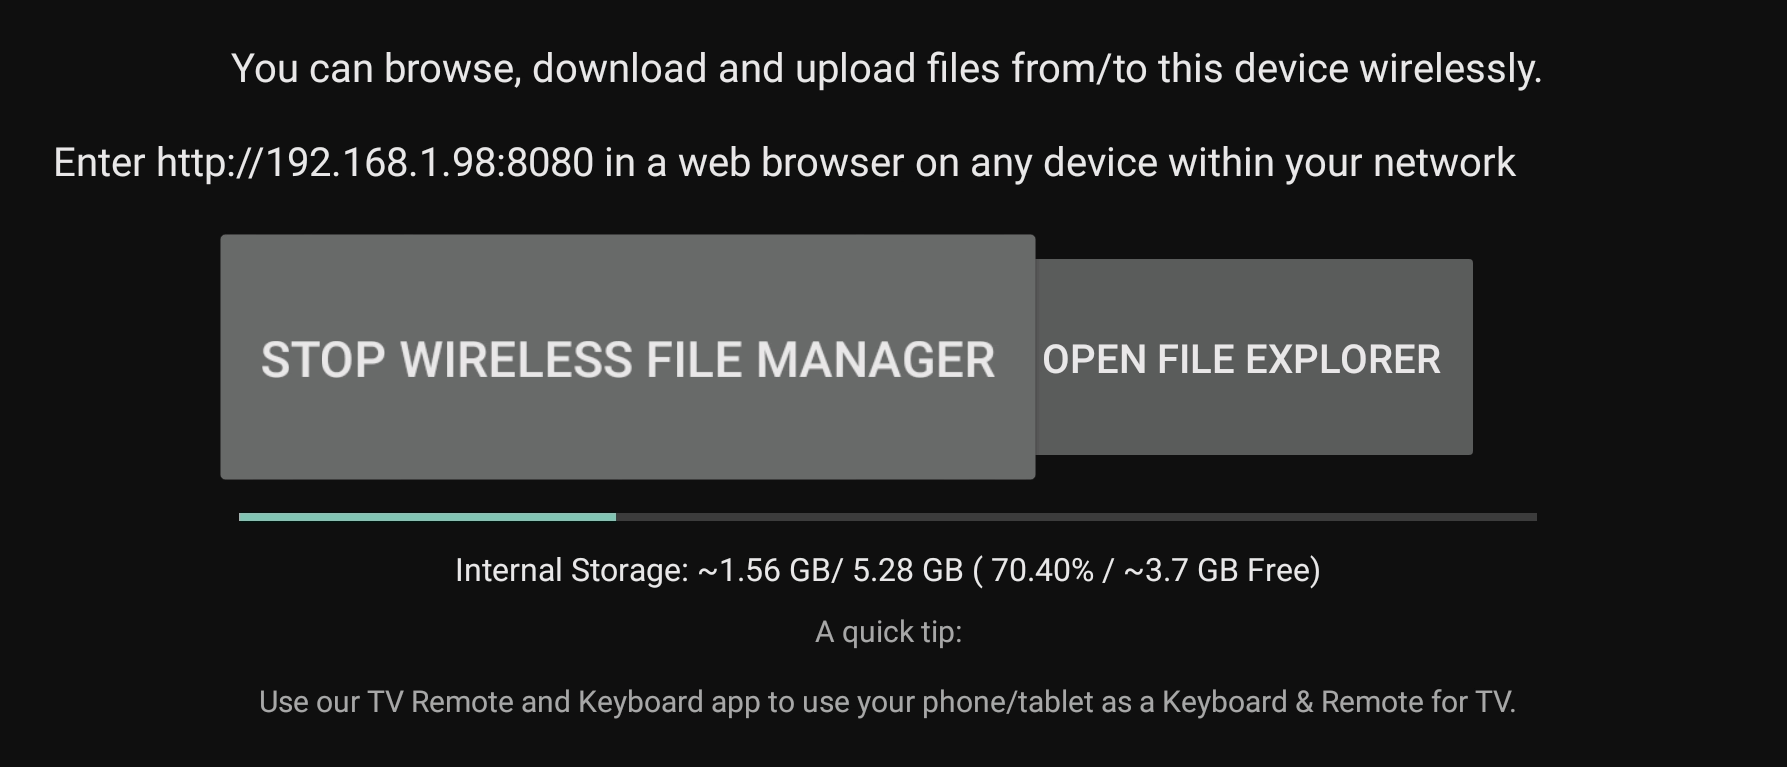 Amazon Fire TV Stick 4K file manager